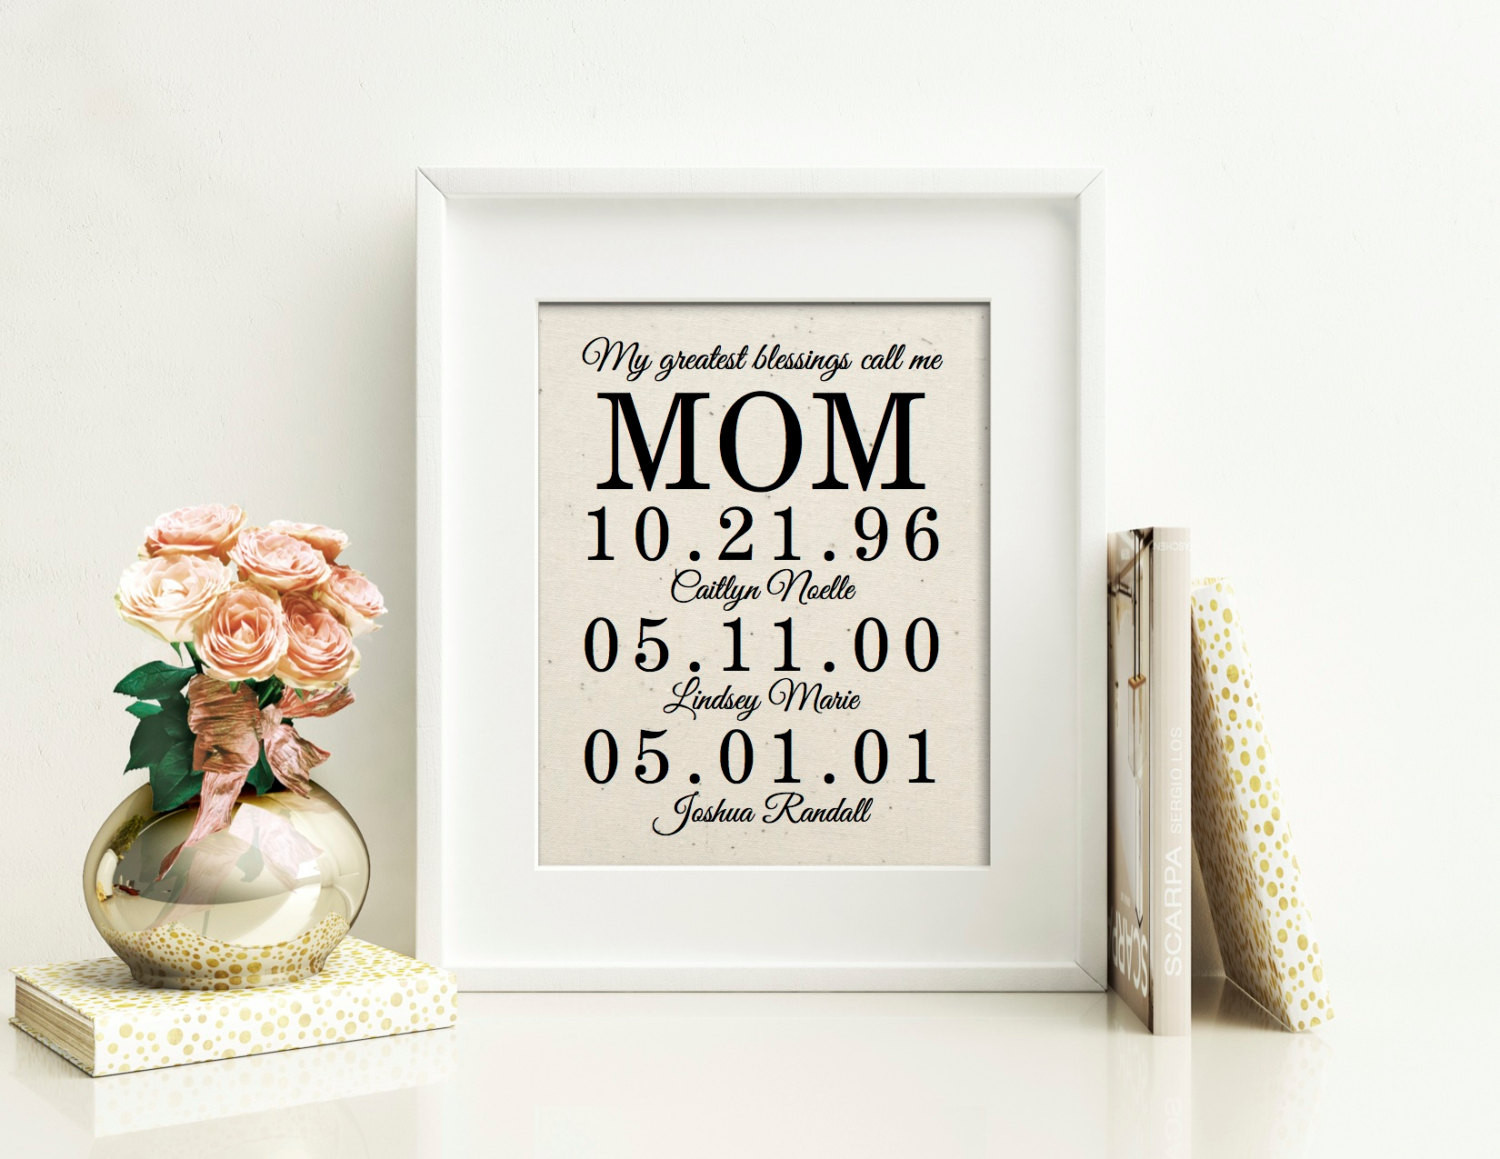 What To Gift Your Mom On Birthday - Creative DIY Gifts for Mom - Hative ...